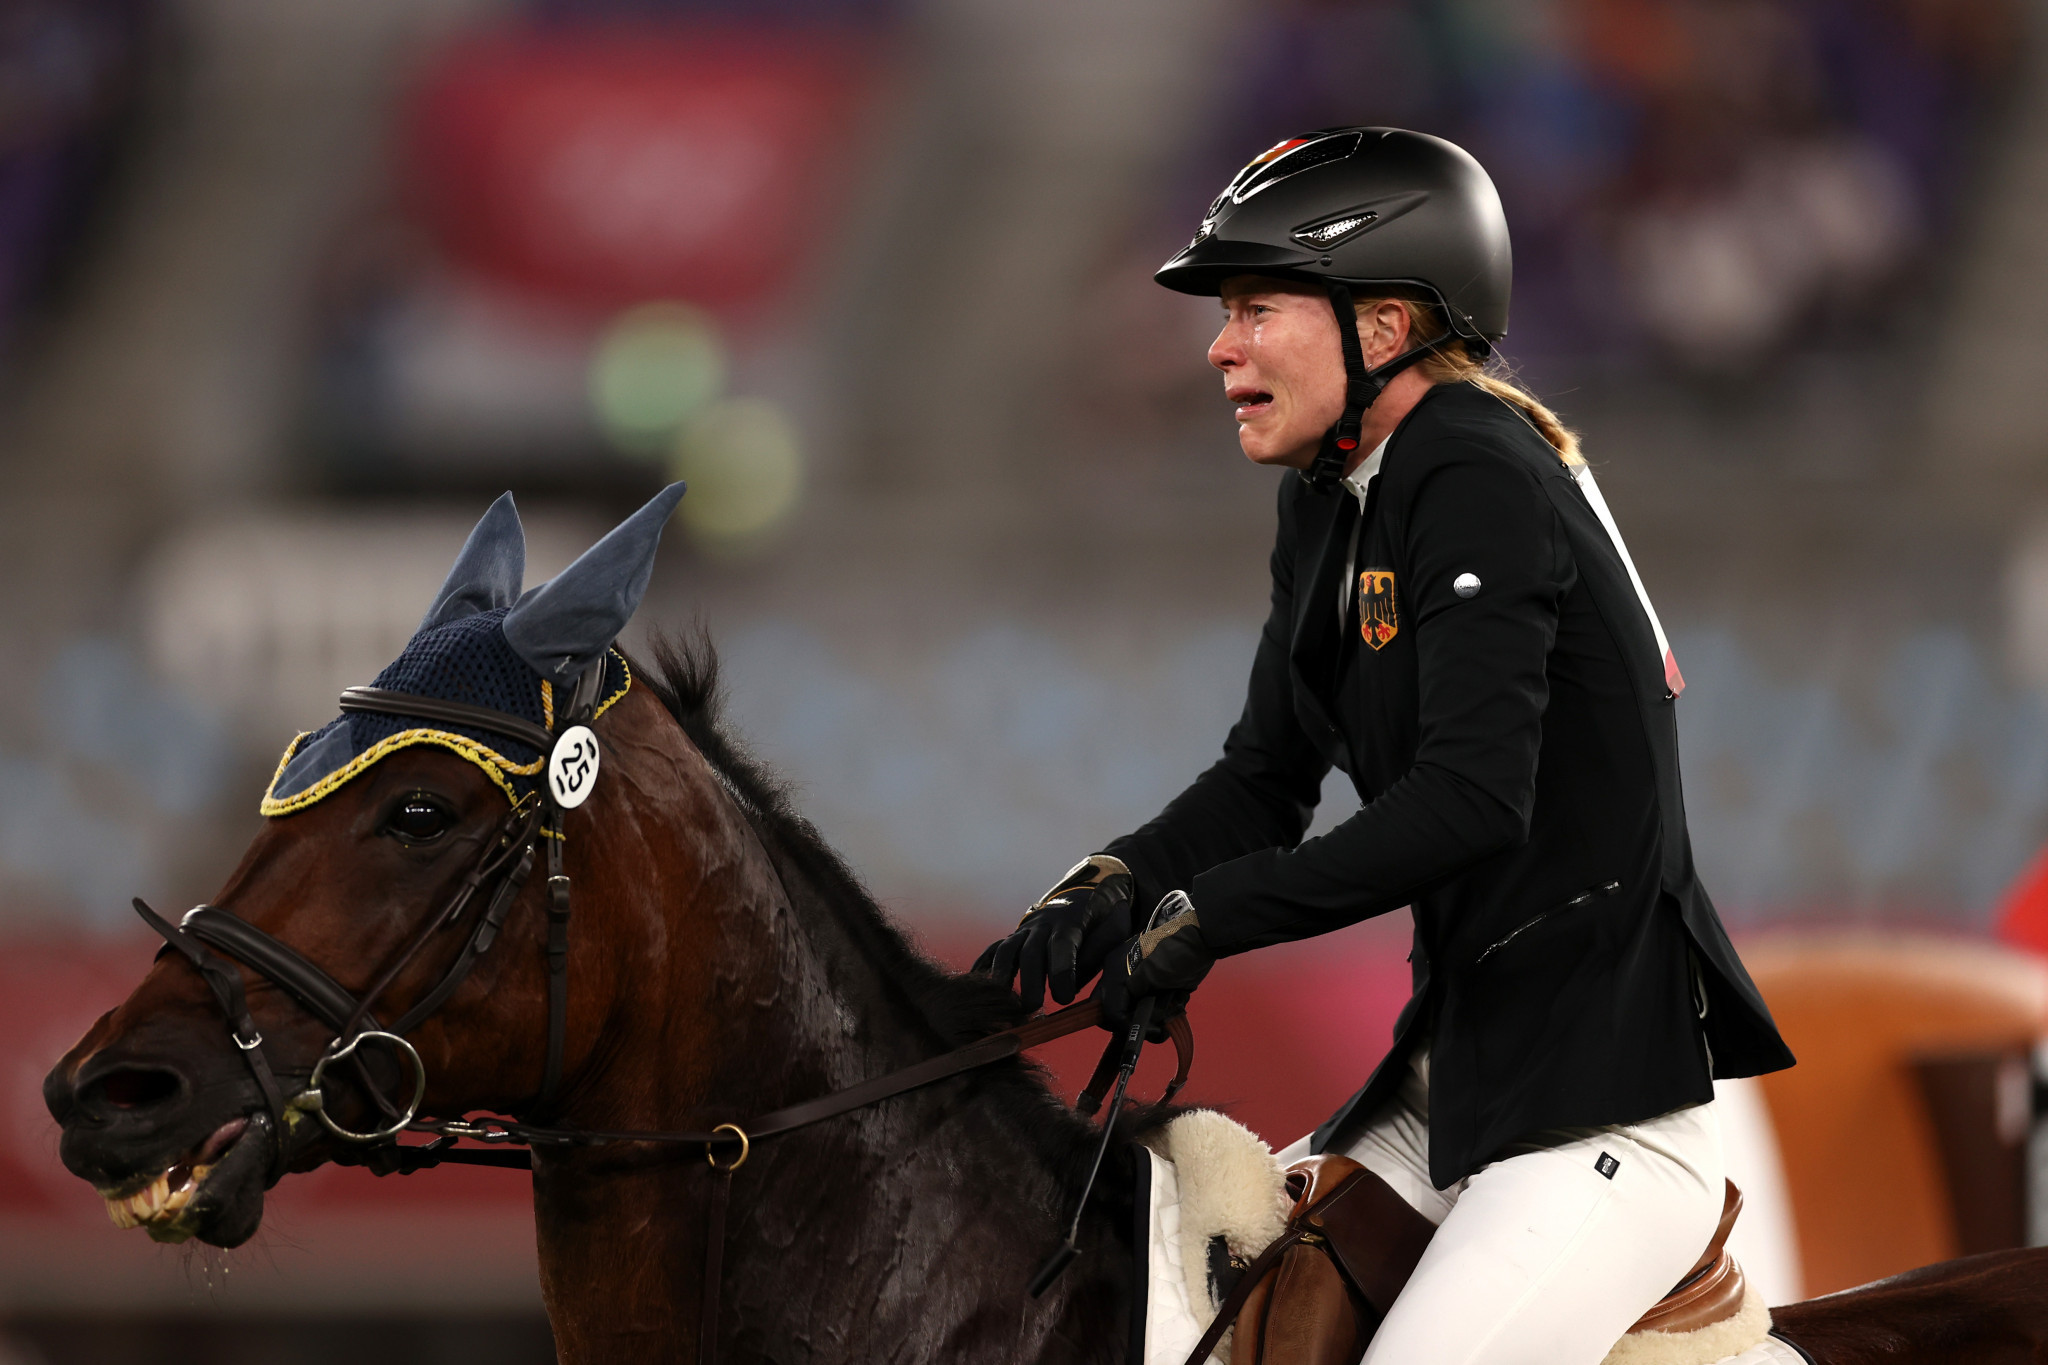 Annika Schleu suffered a breakdown when unable to control her horse during the equestrian section of the modern pentathlon programme, and a German coach was sent home for striking the animal ©Getty Images